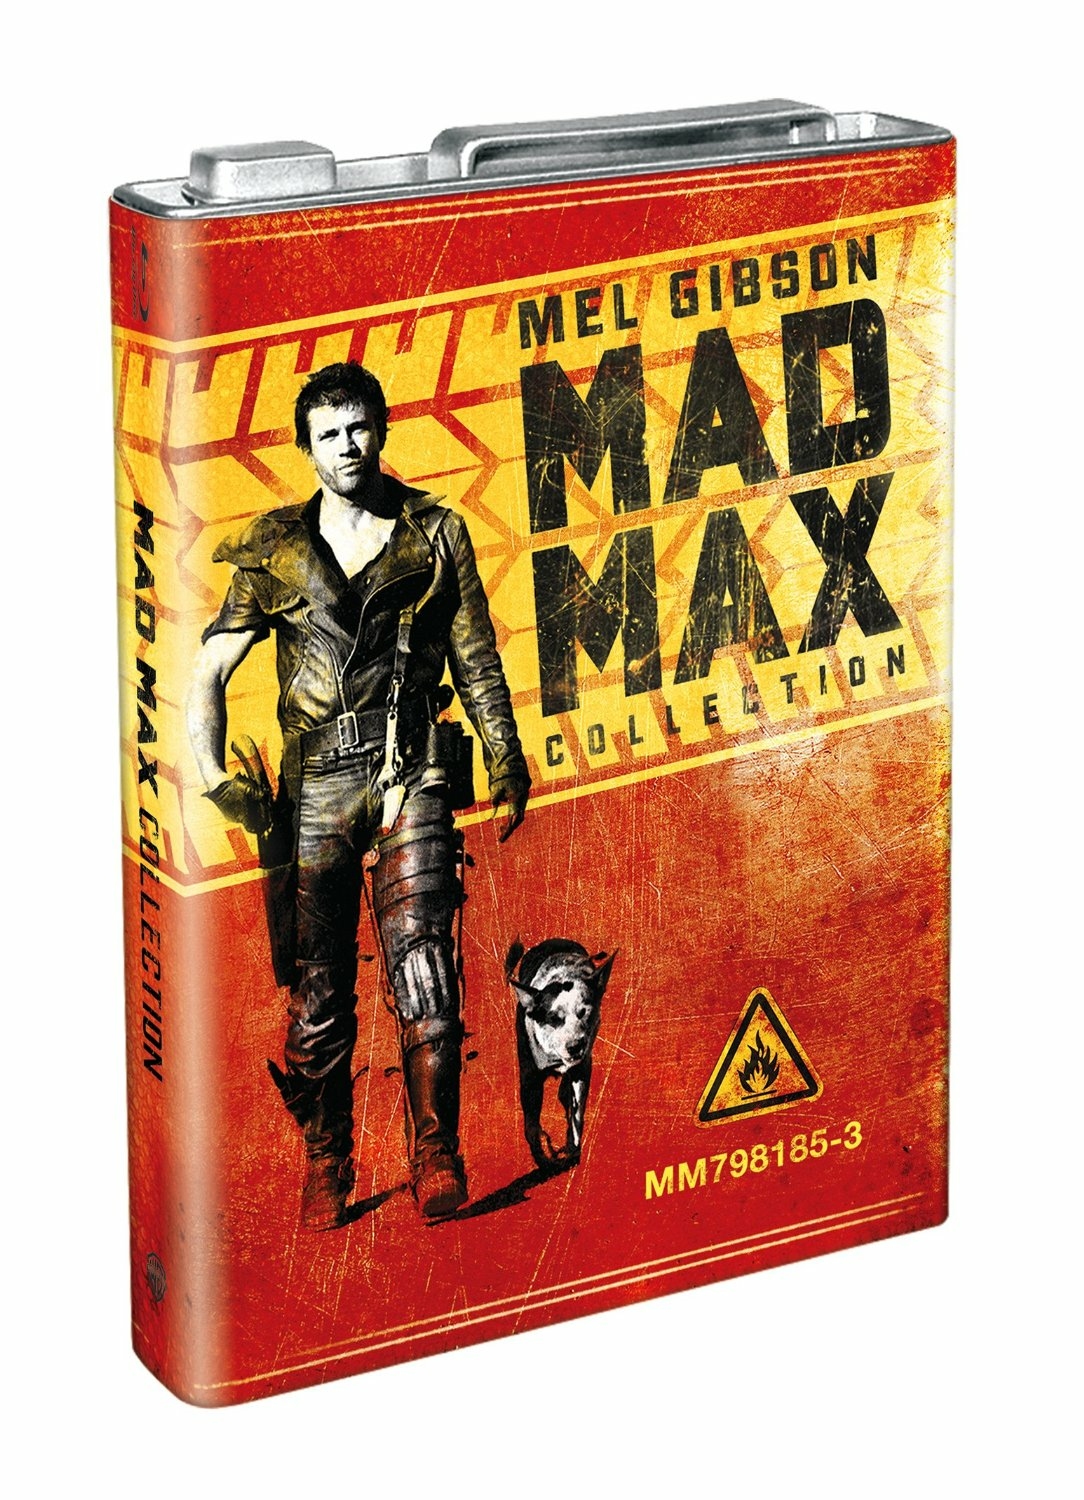 Max collection